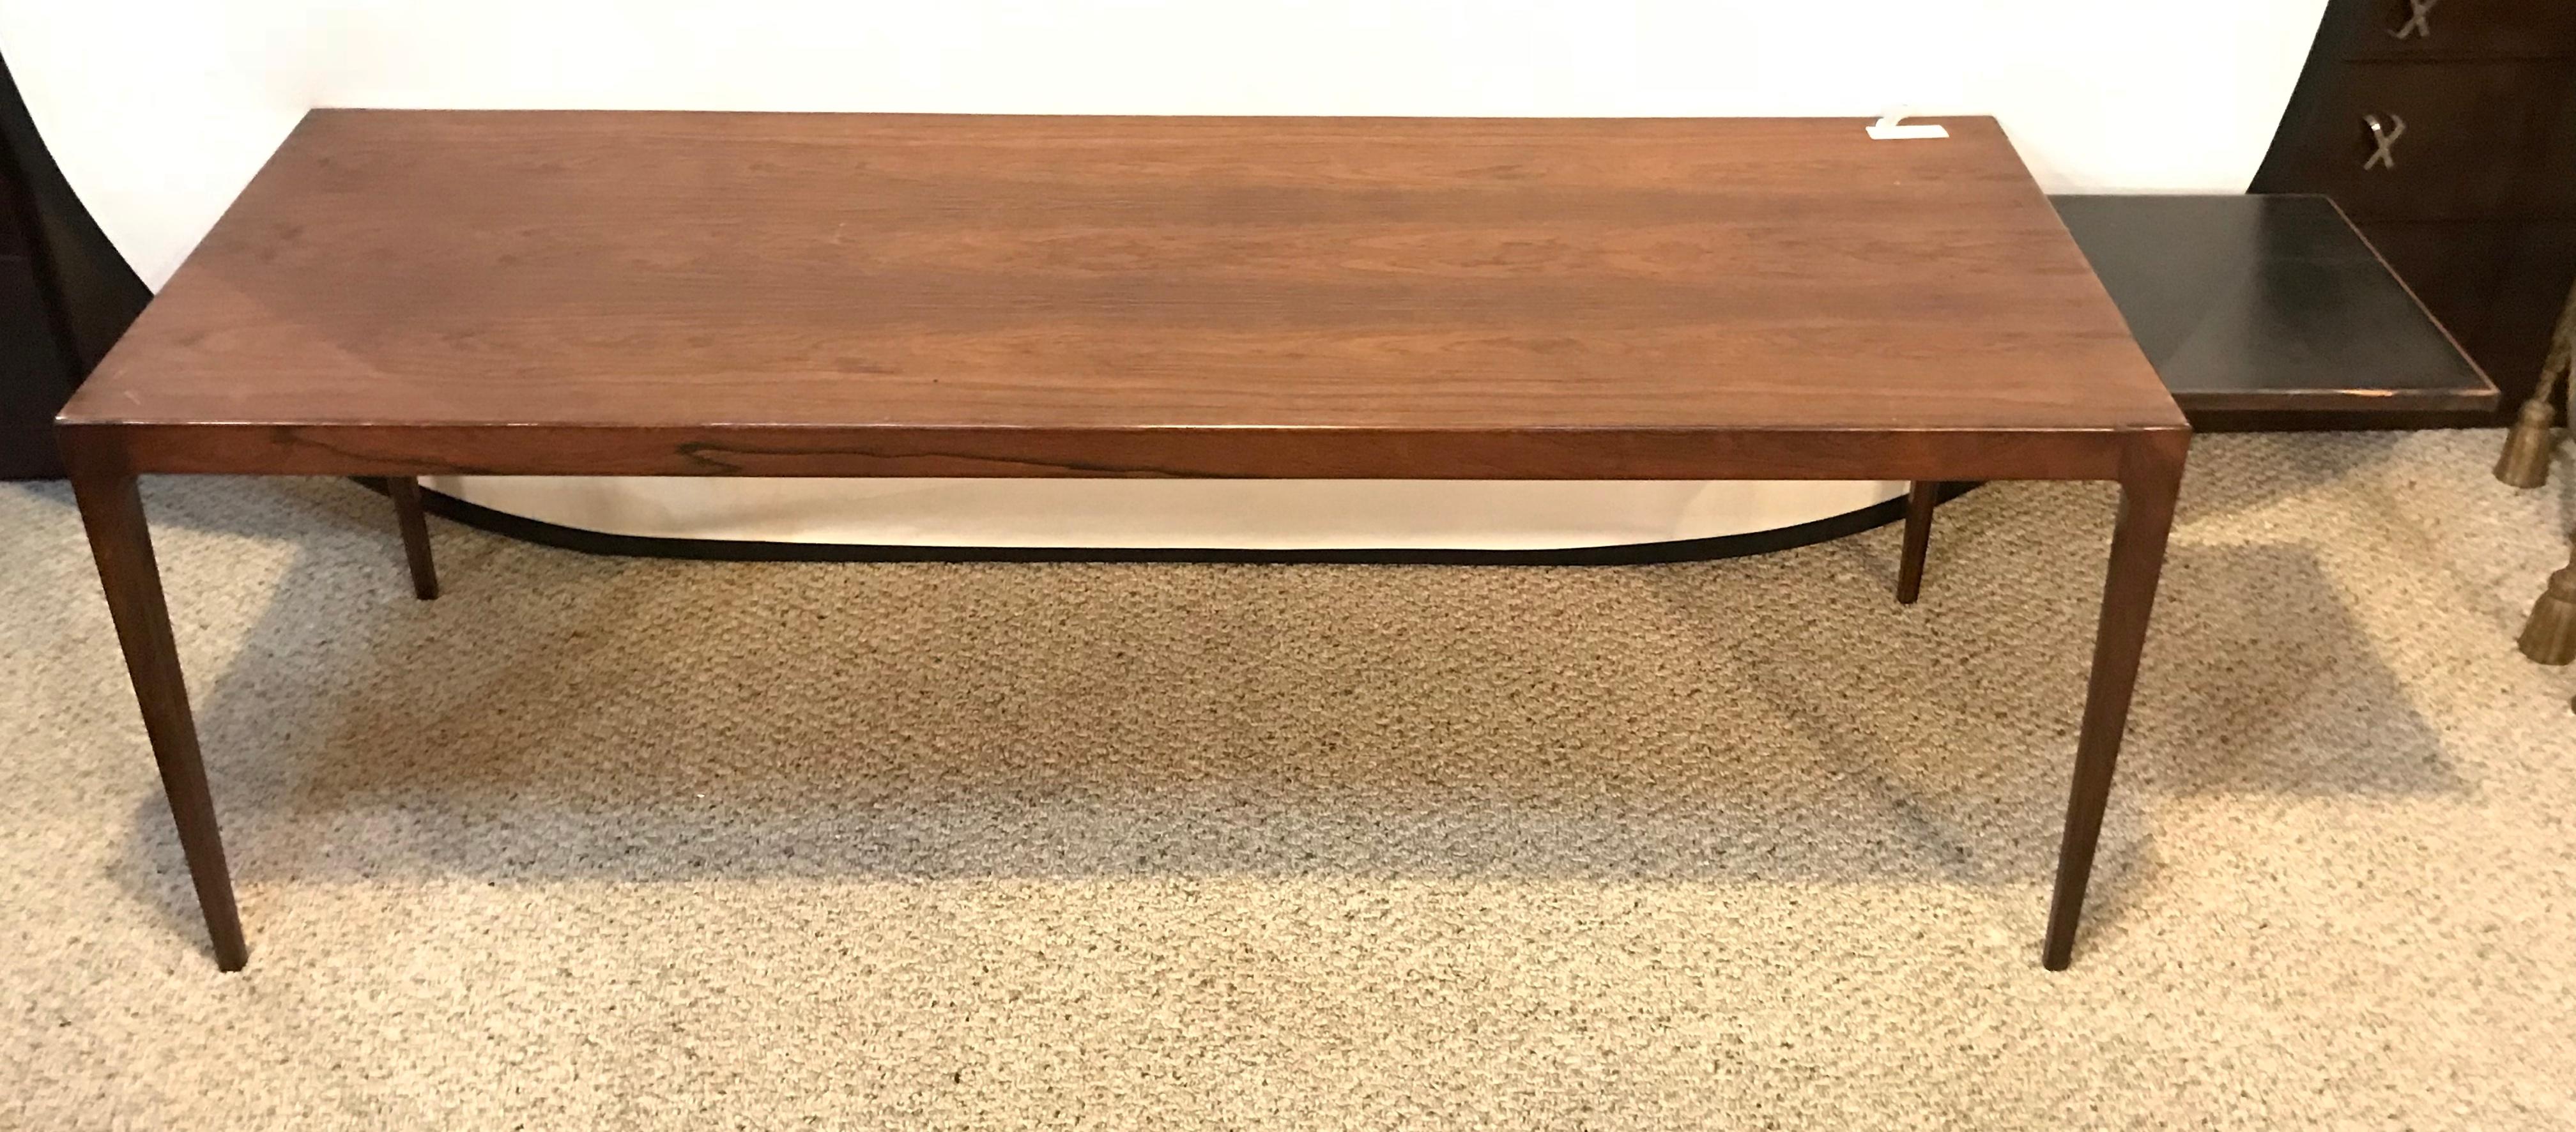 Mid-Century Modern rosewood coffee table with pullout / pull-out sides. This finely polished coffee table is strong and sturdy having pullout / pull-out trays of rosewood and ebony design on both ends. This sleek and stylish coffee low table is a